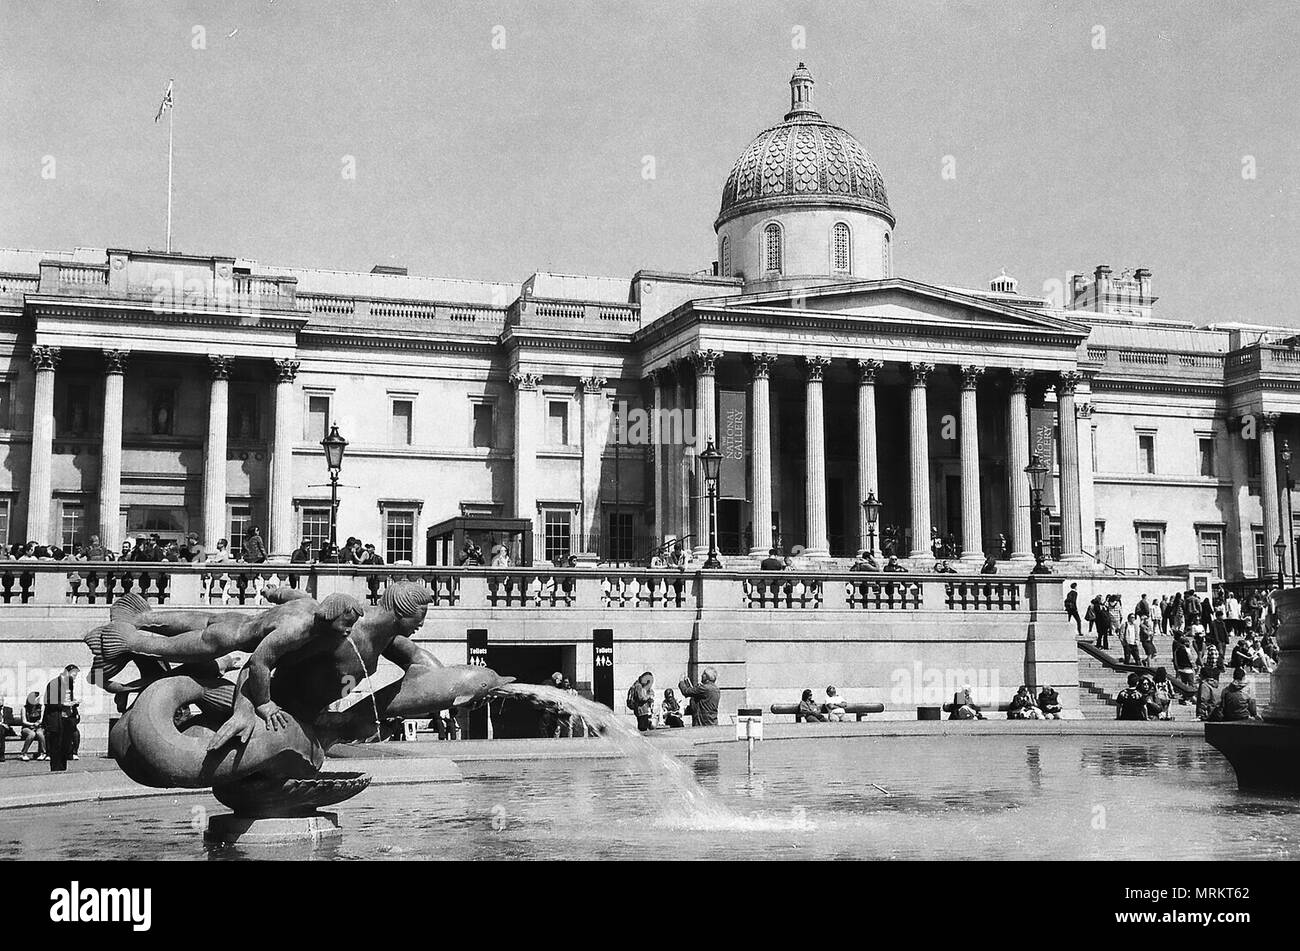 London, UK,  2018.( Image taken on Ilford FP4 film and scanned to convert to digital)  The National Gallery and Trafalgar Square Fountains, Stock Photo